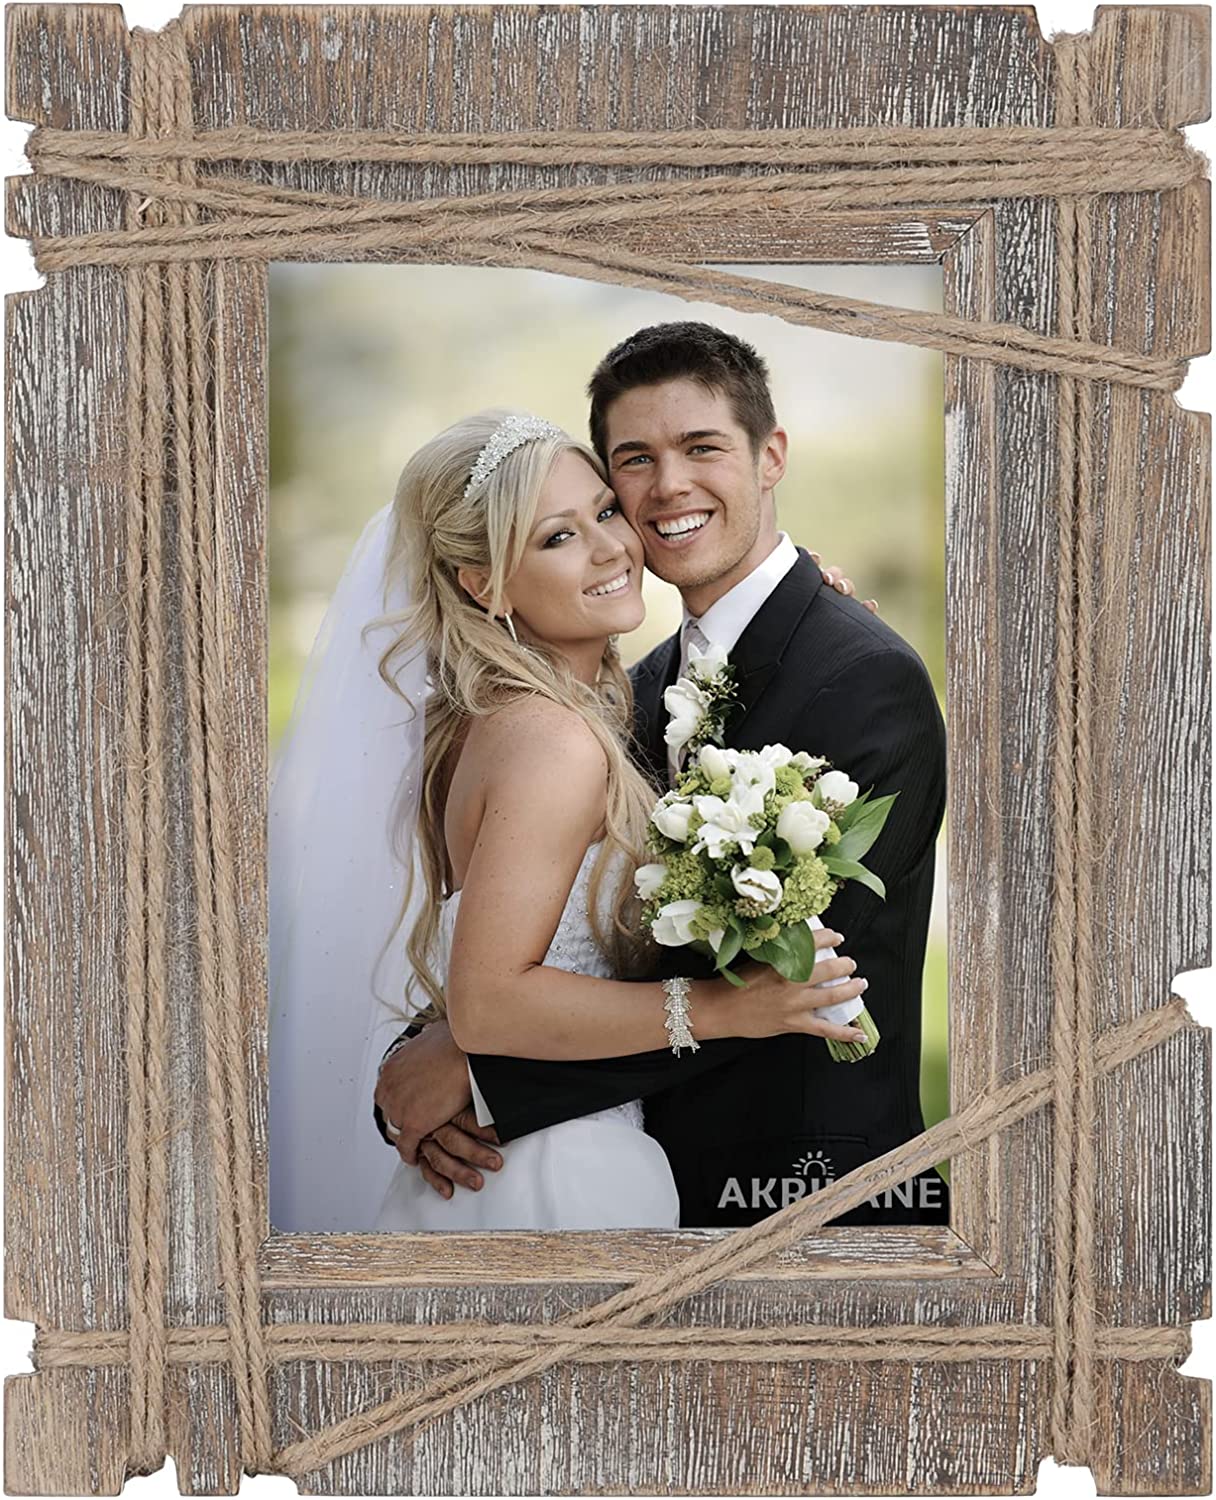 4x6 picture frame, Shabby chic picture frames, Rustic frames